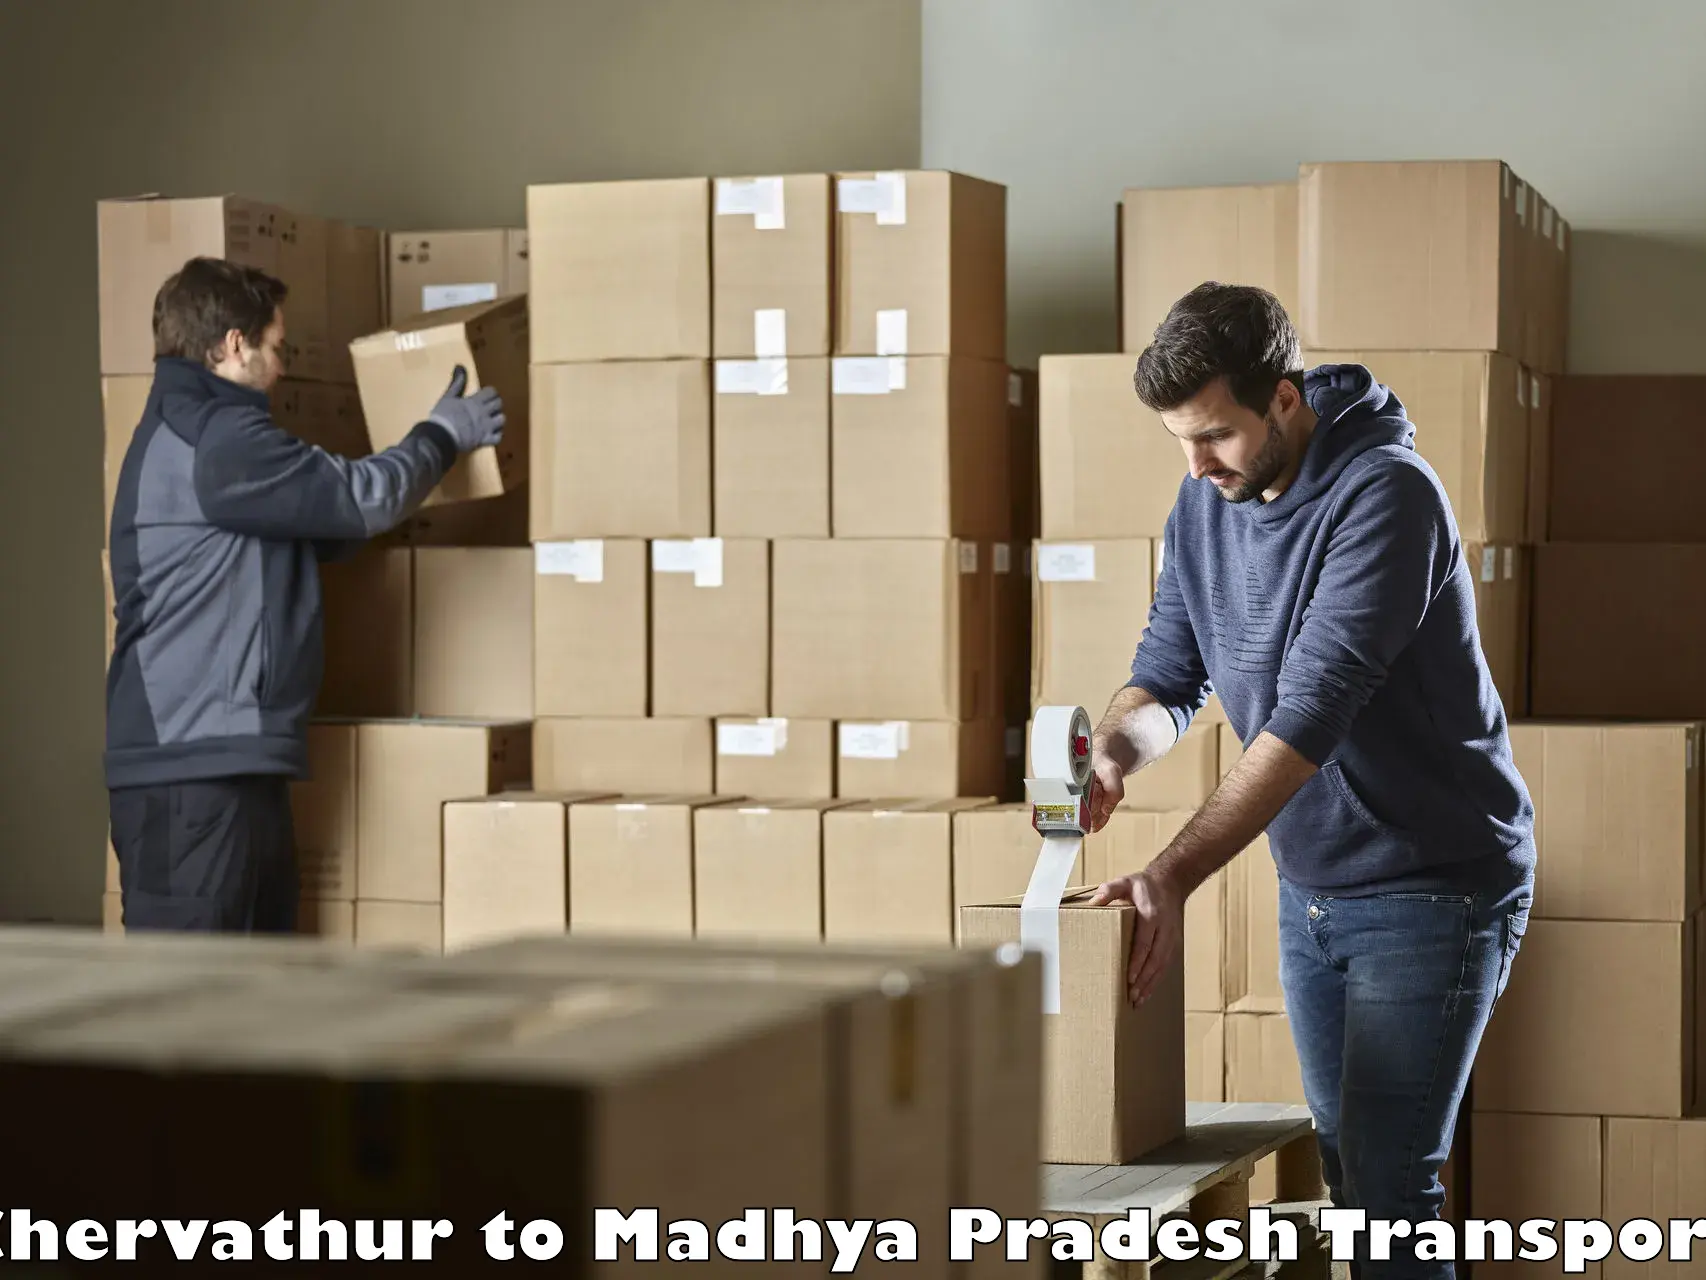 Part load transport service in India Chervathur to Churhat